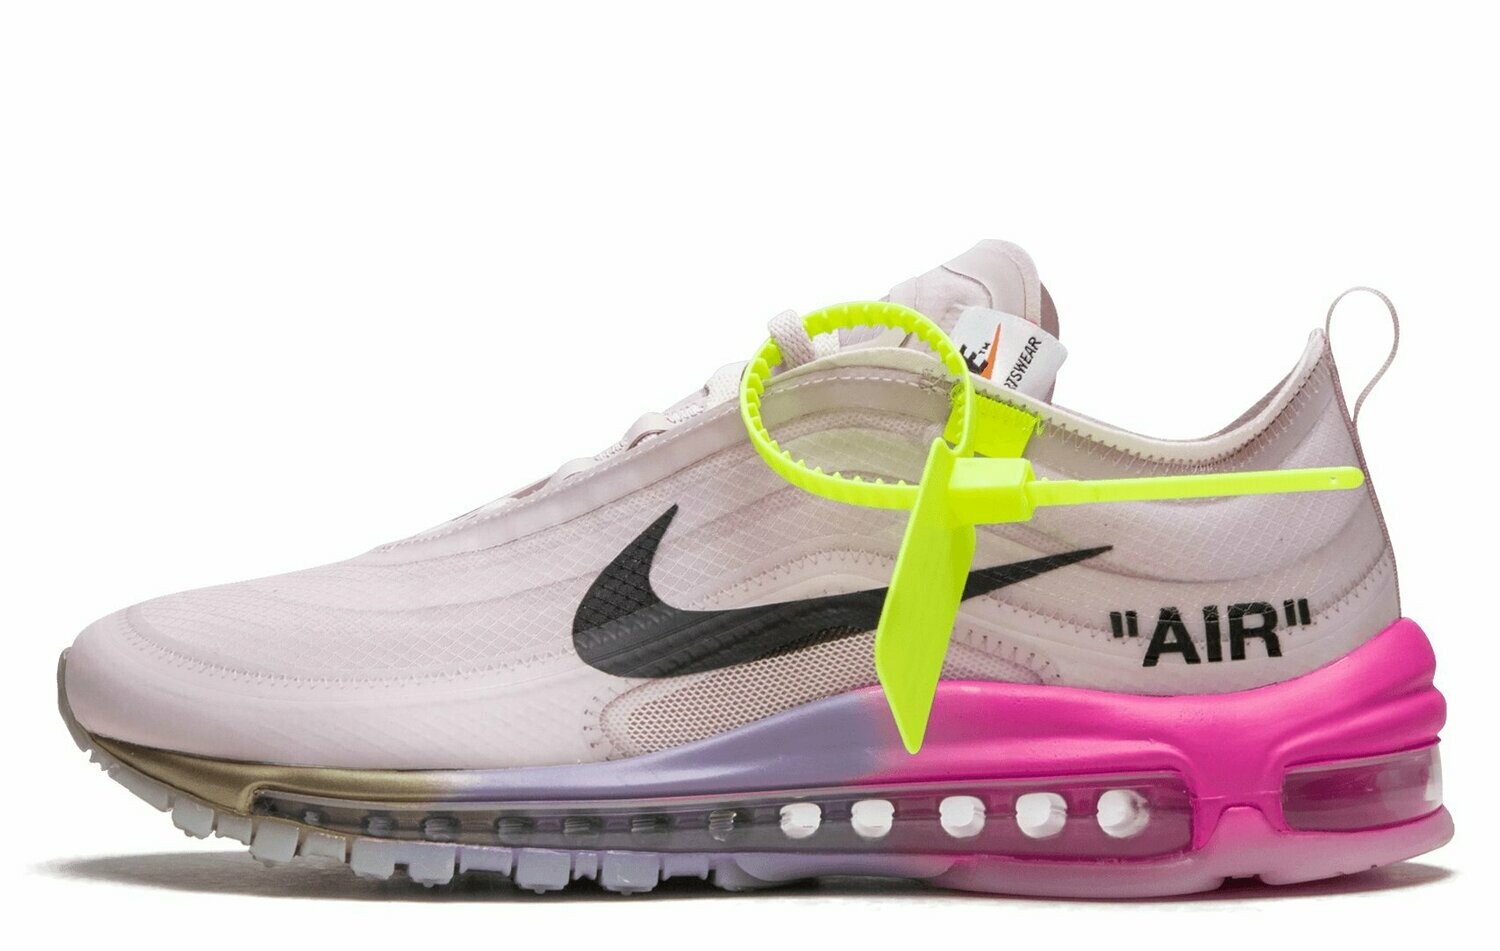 Serena Williams x Off-White x Air Max 97 OG “Queen”